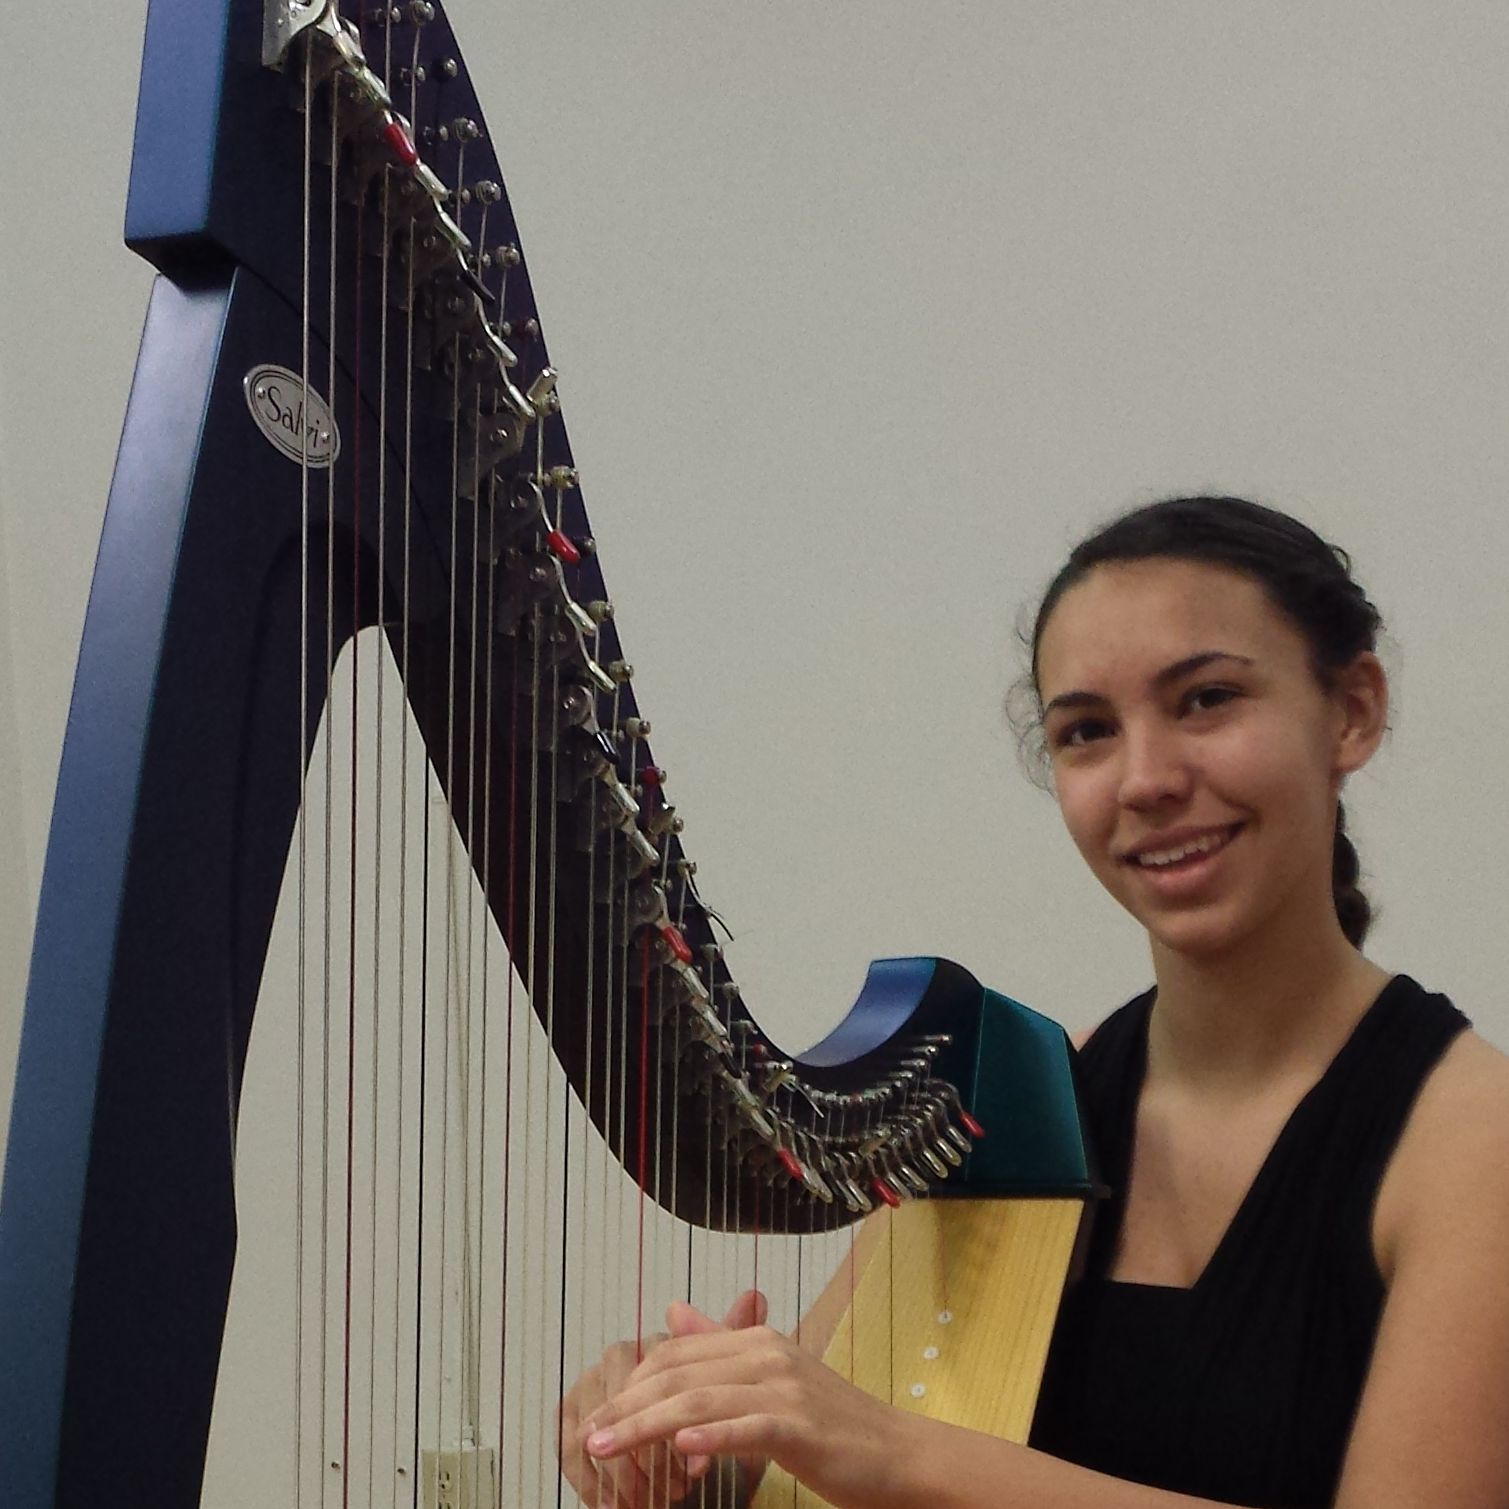 Harp Instructor in Kingsport, Tennessee